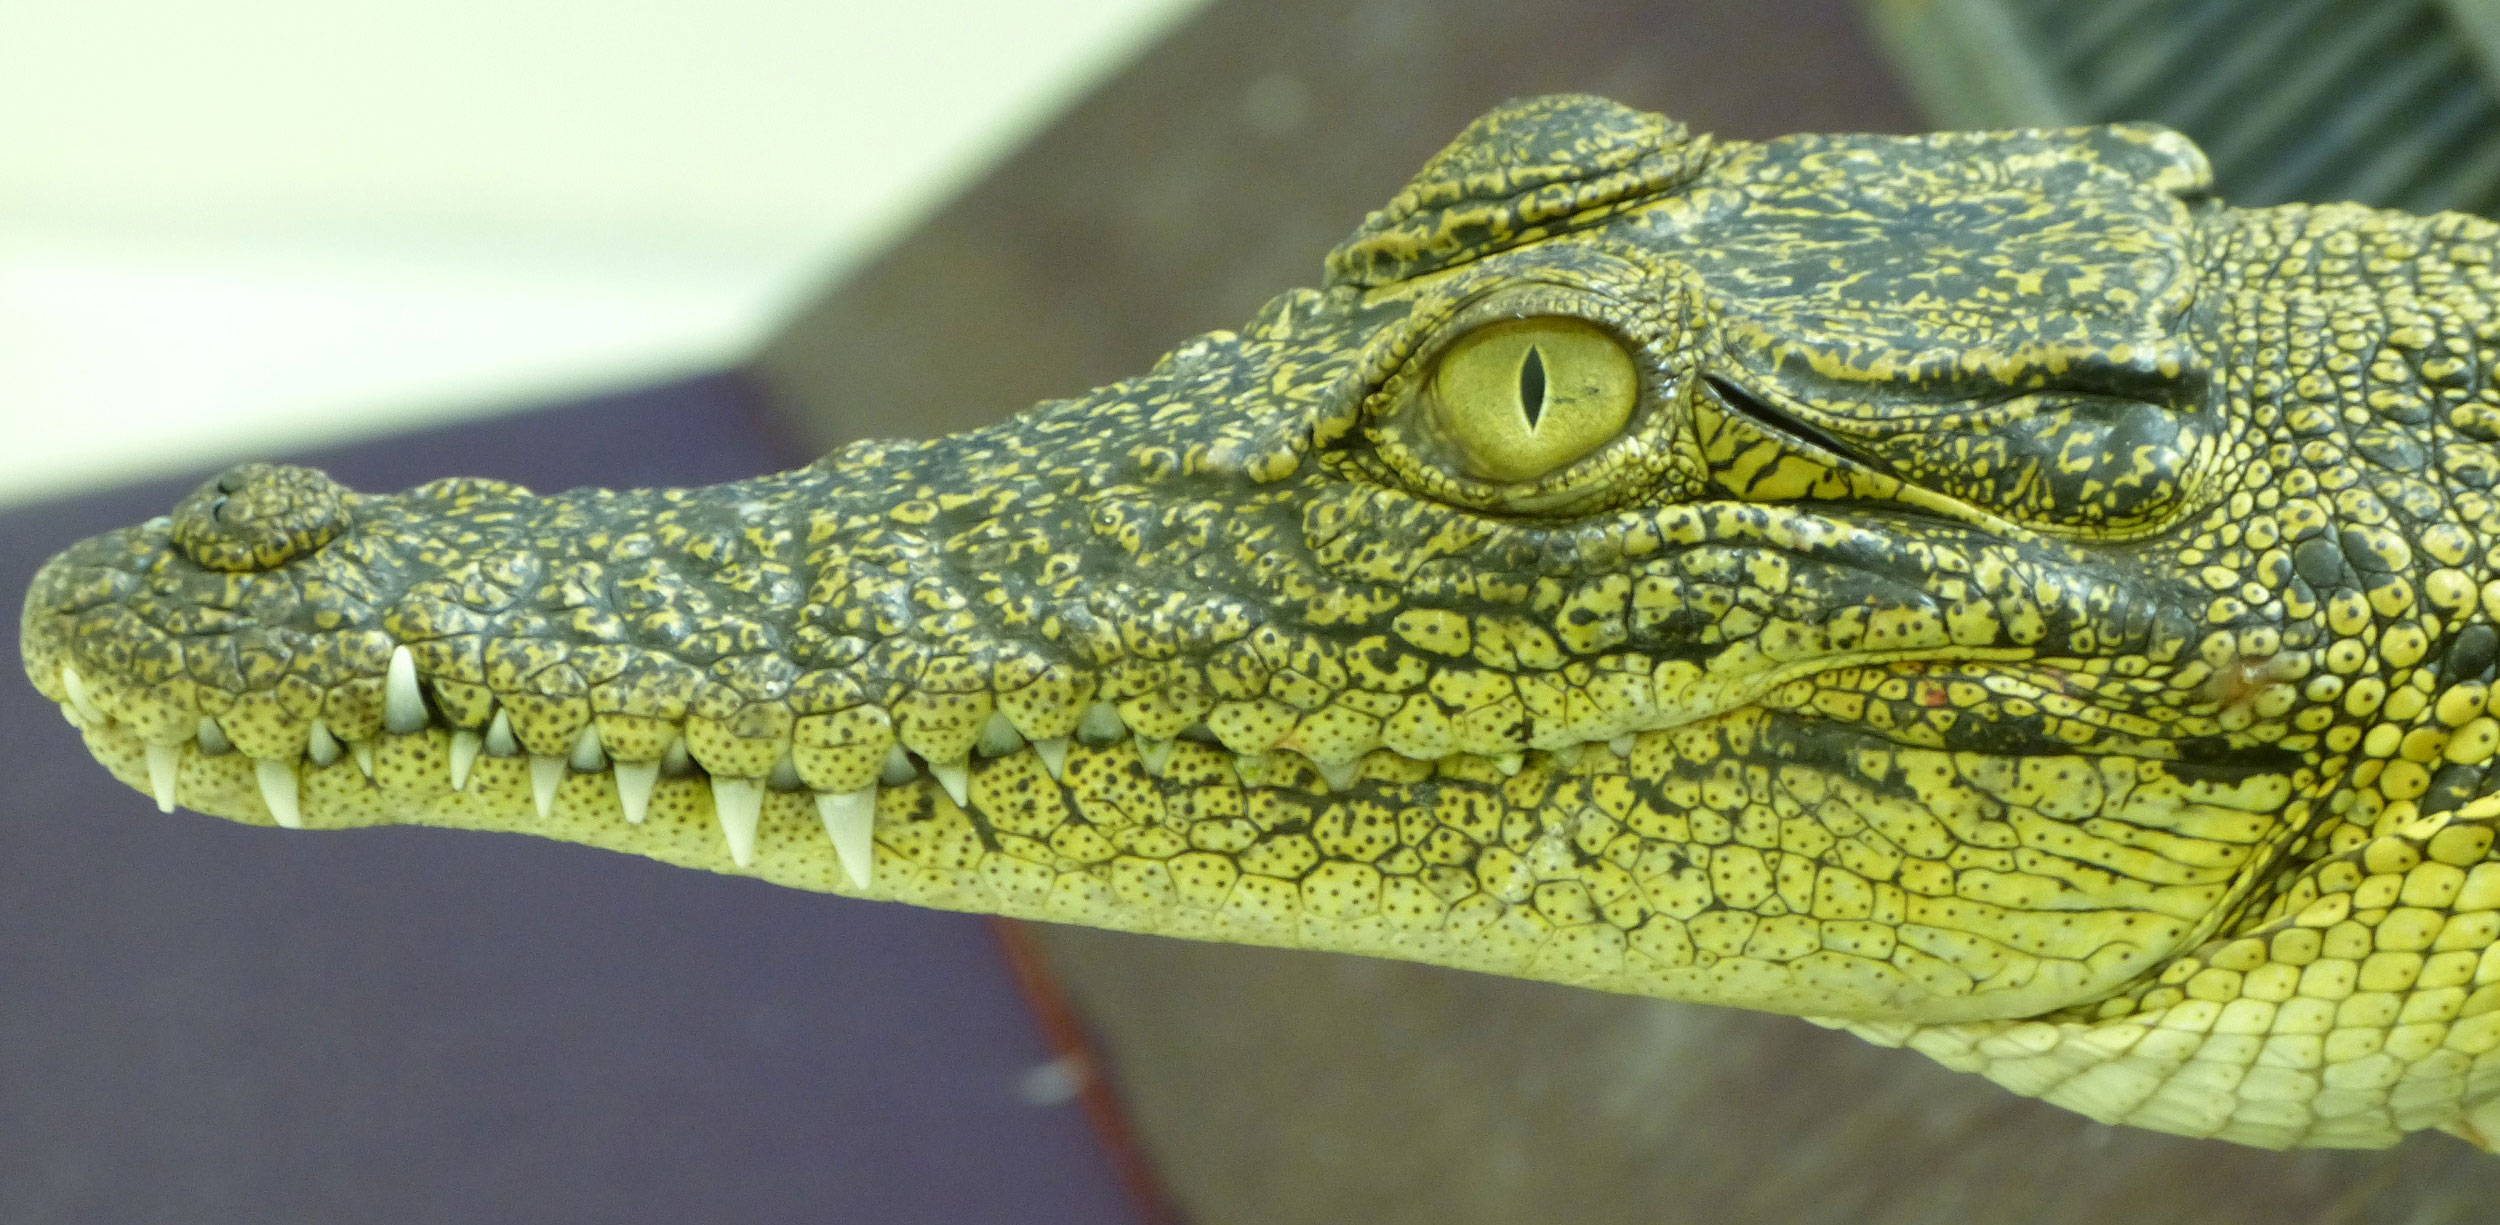 Crocodile eyes more sophisticated than previously thought ...